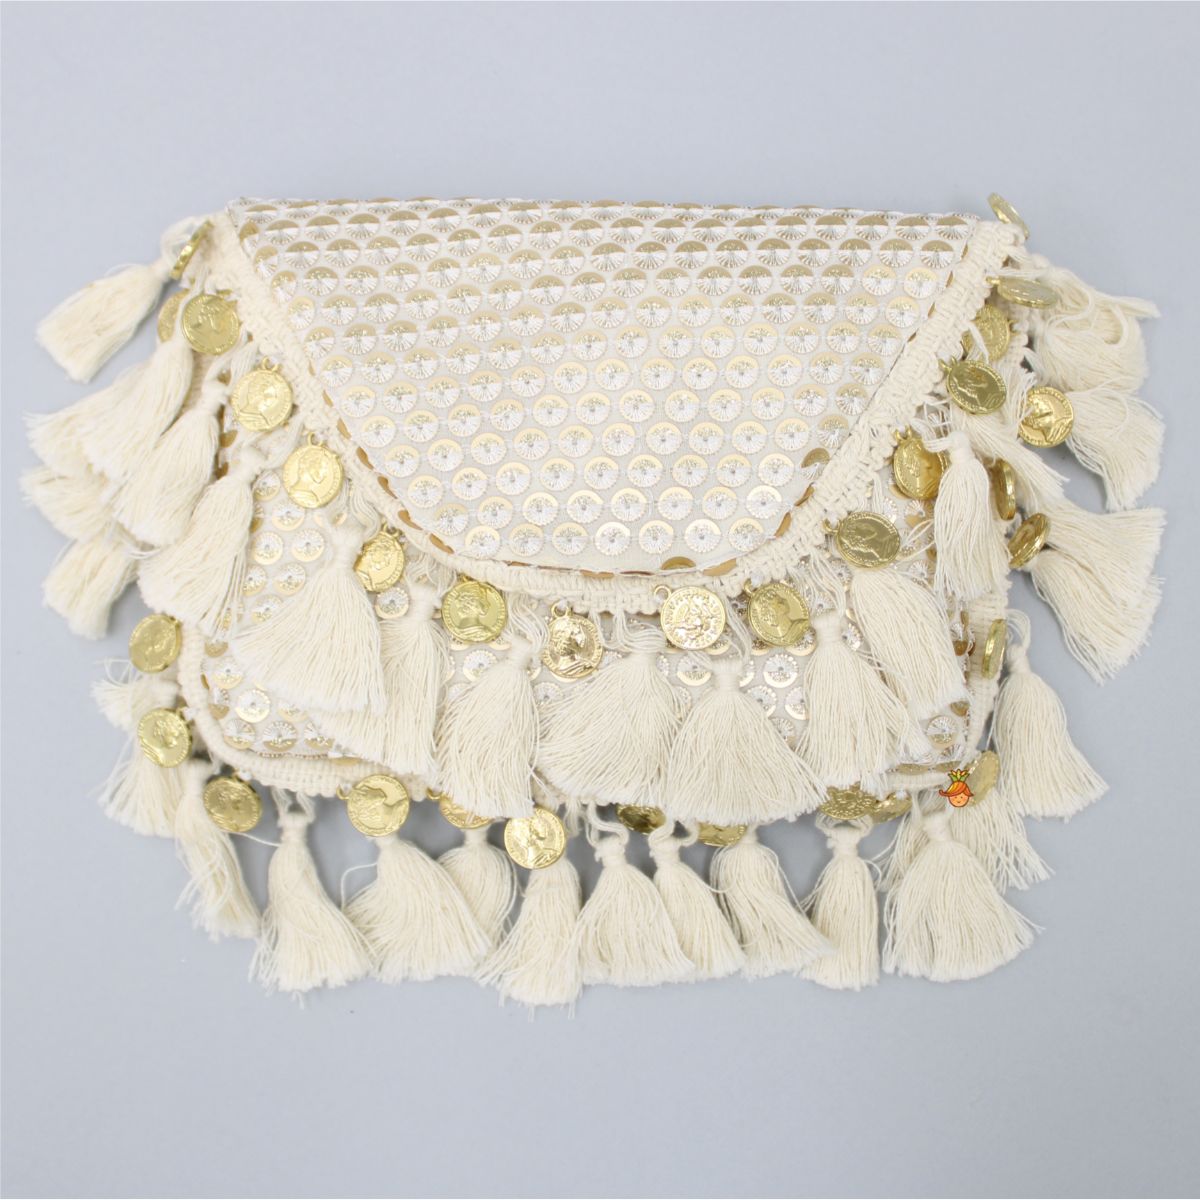 Shimmery Sequins Embroidered Georgette Off White Sling Bag